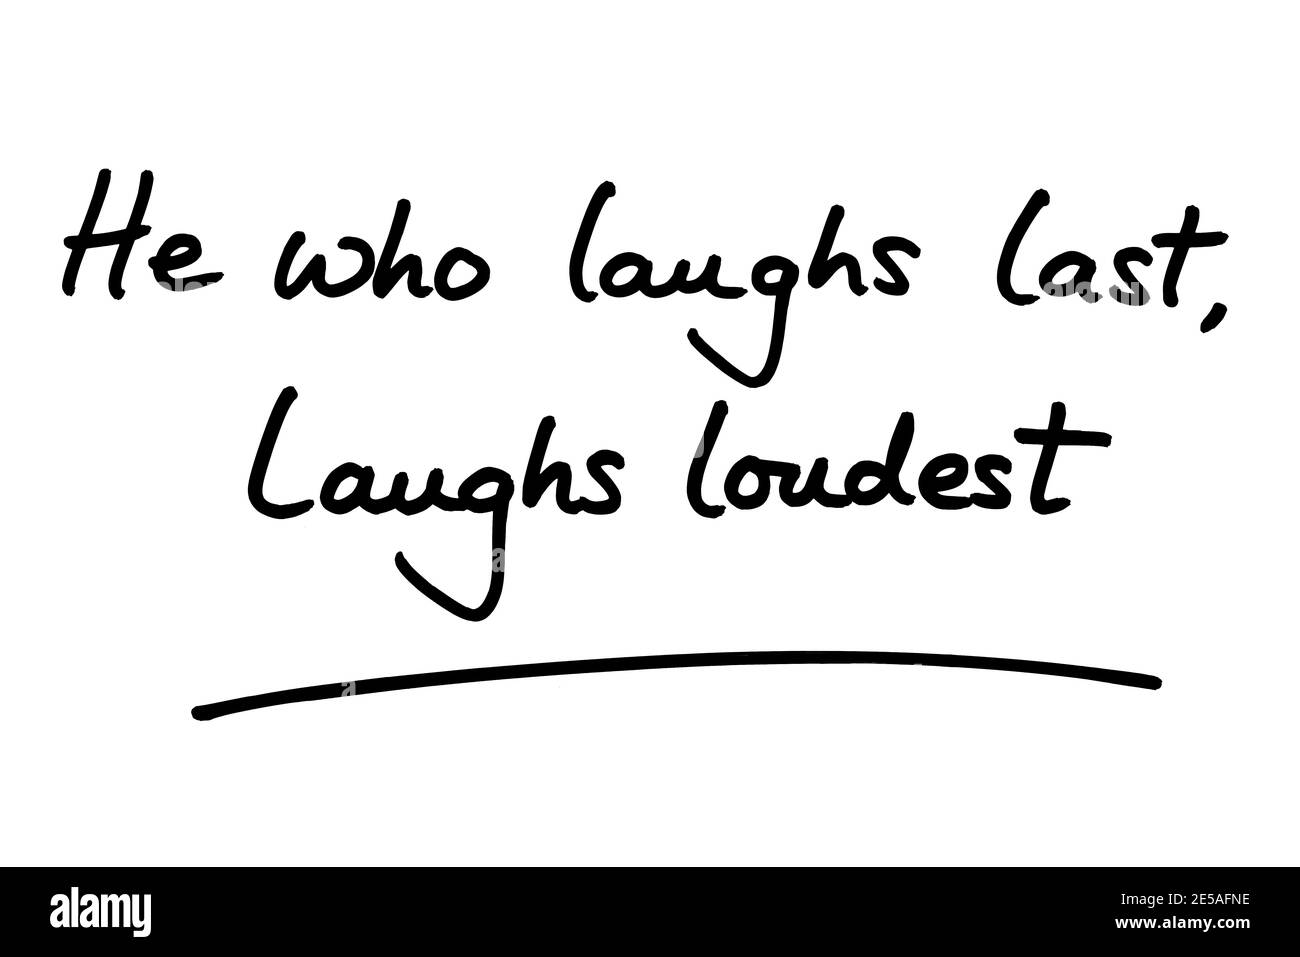 He who laughs last, laughs loudest - handwritten on a white background. Stock Photo